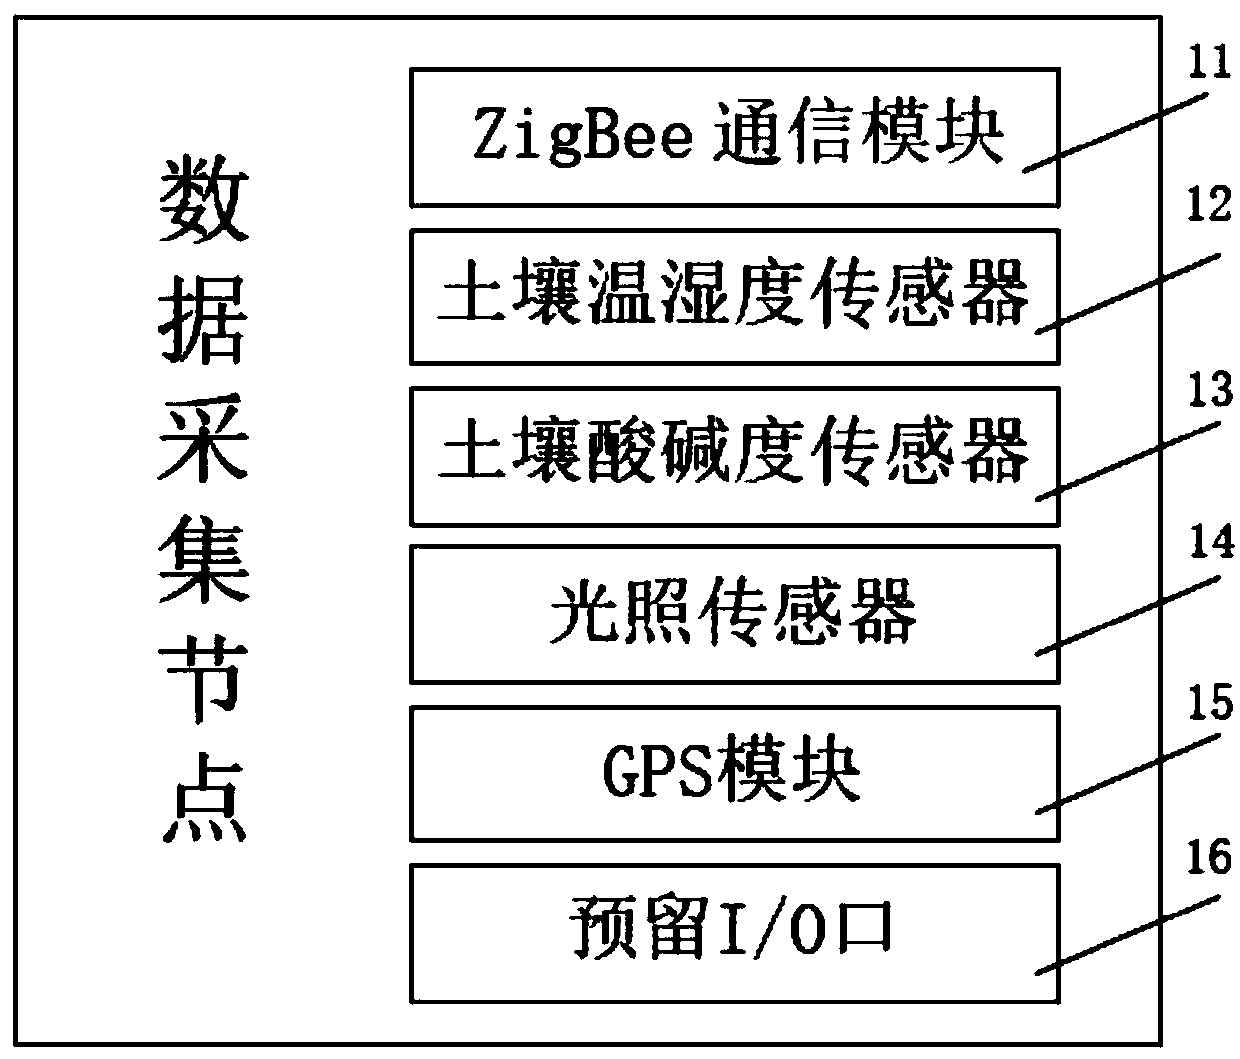 Sensor network-based crop growth environment monitoring system and method